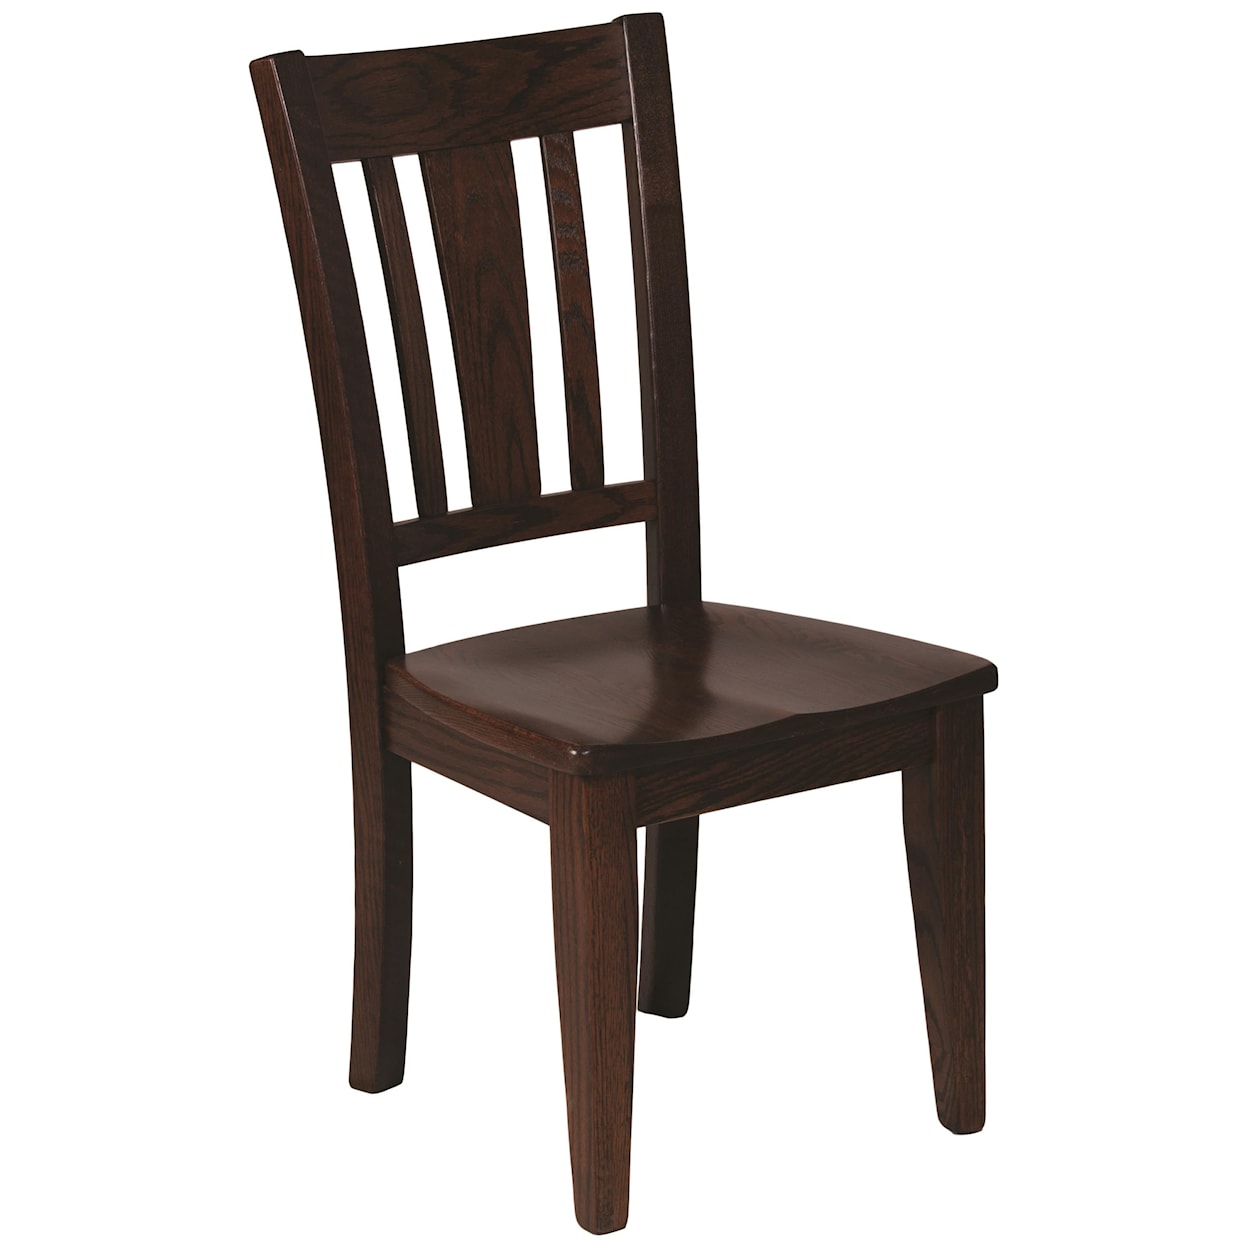 Oakwood Industries Addison Dining Chair